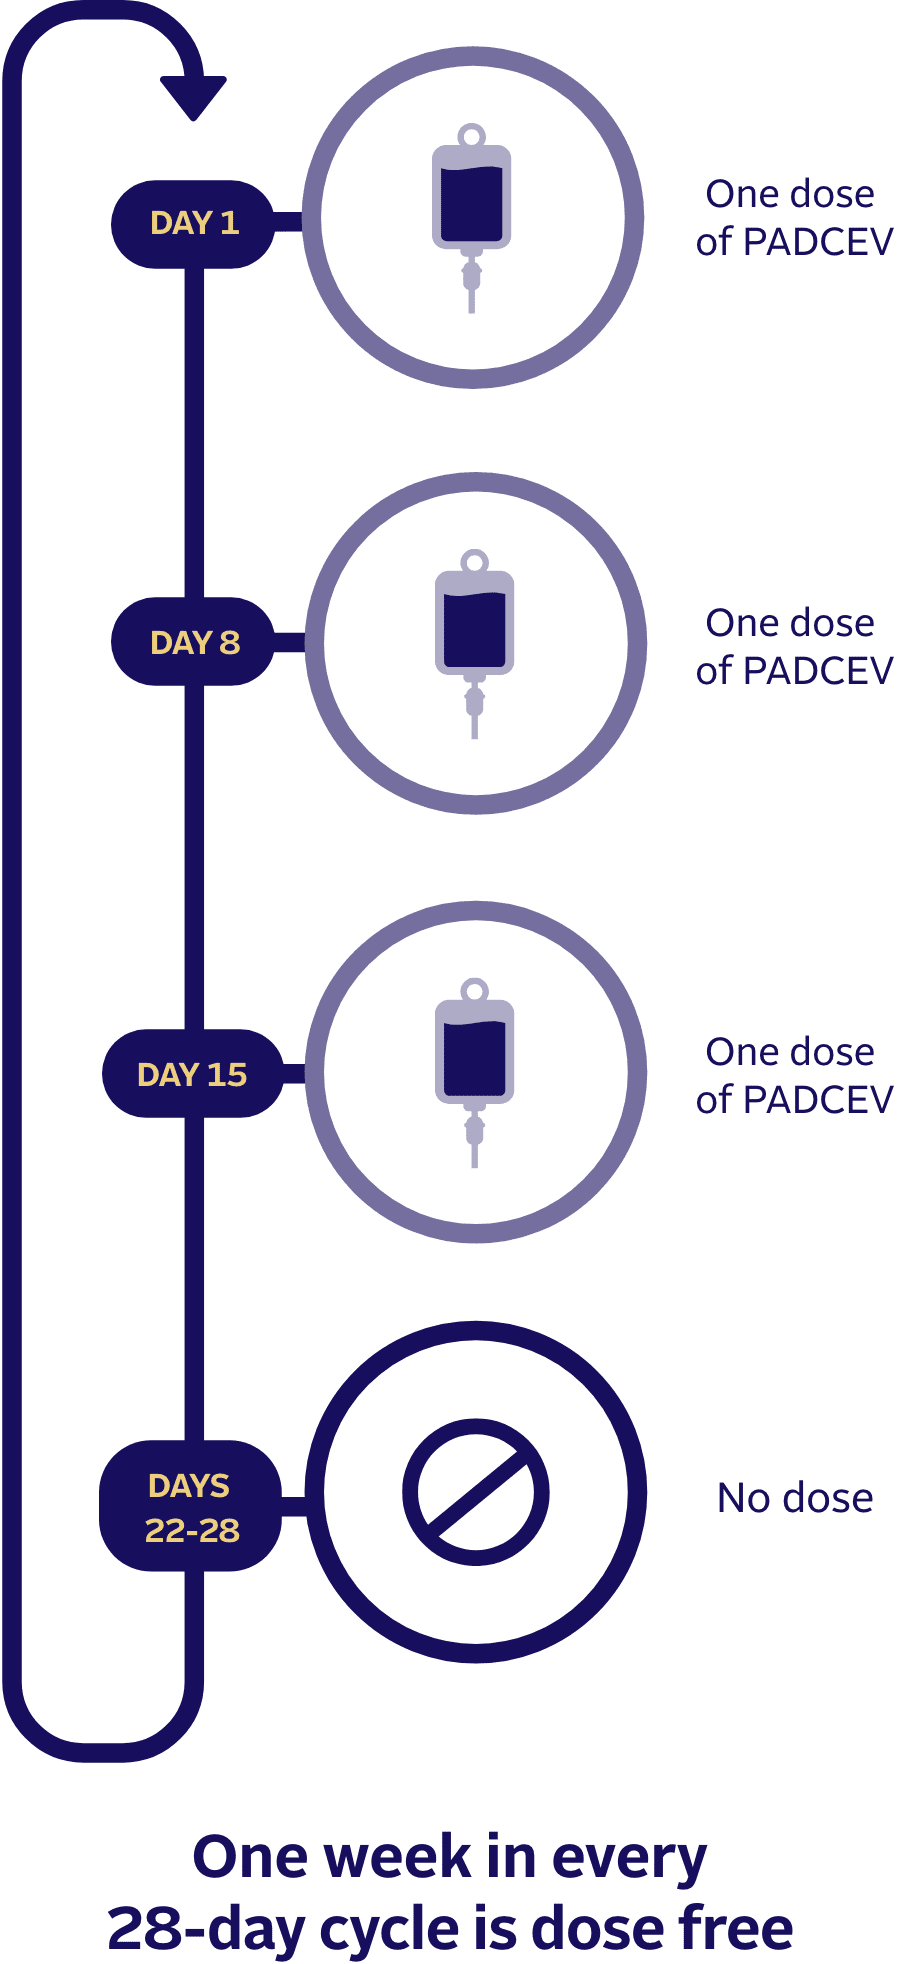 How PADCEV alone is given.